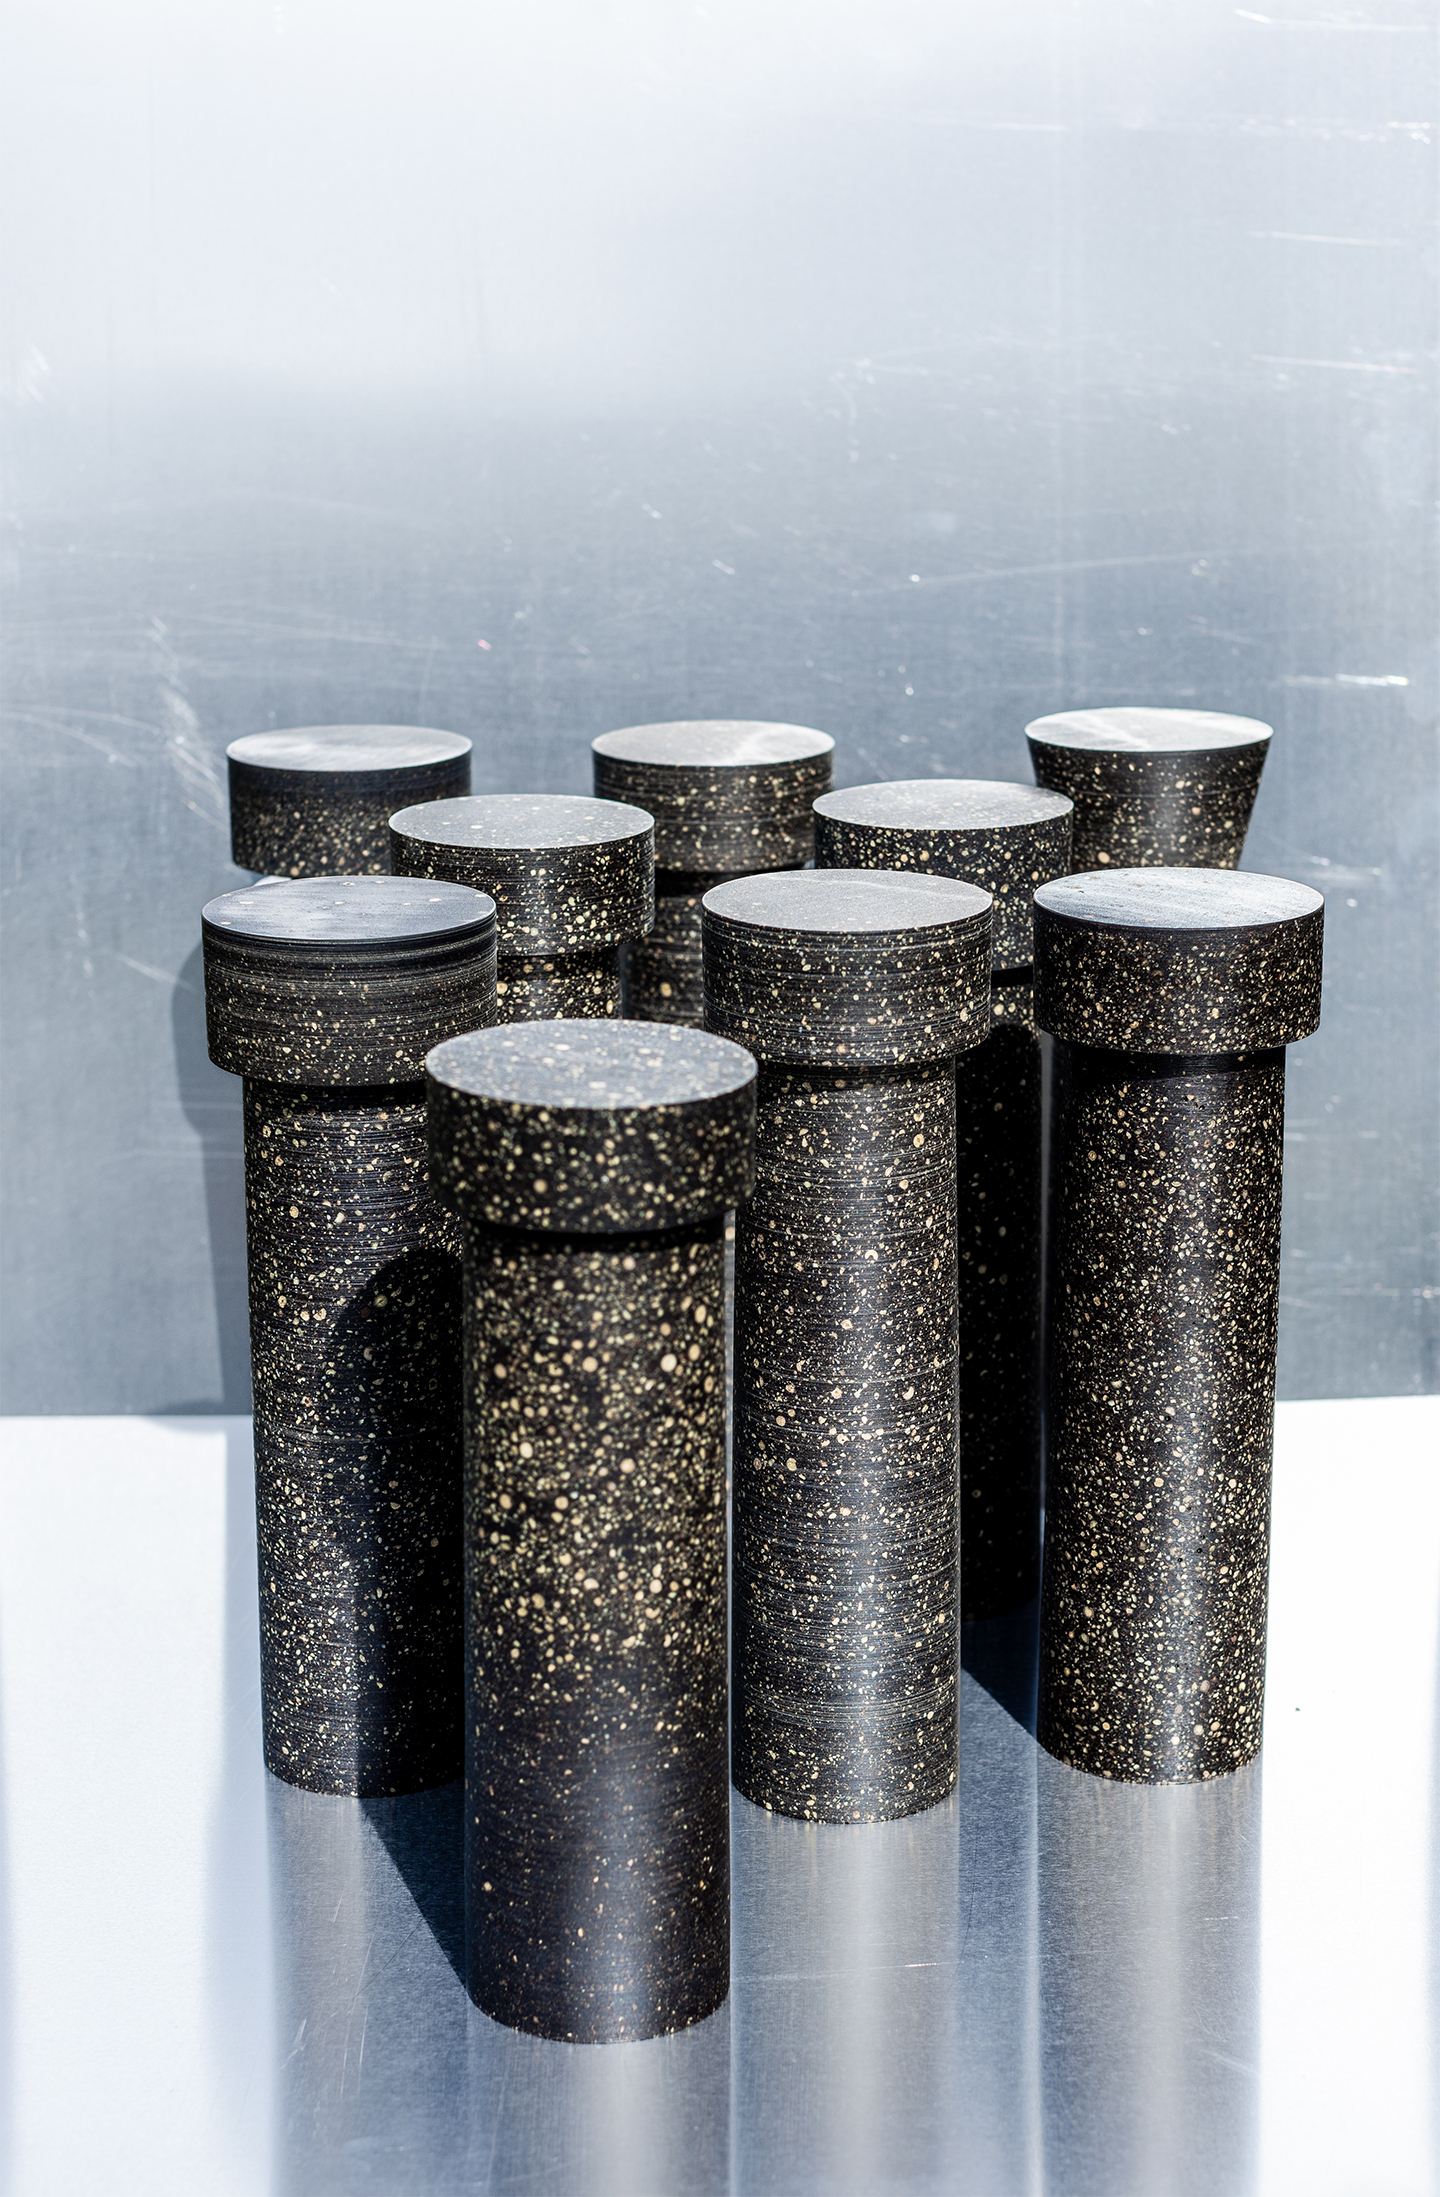 Pepper mills designed by Marc Sweeney, part of his Guerilla Production, 2023. Photo courtesy of Marc Sweeney